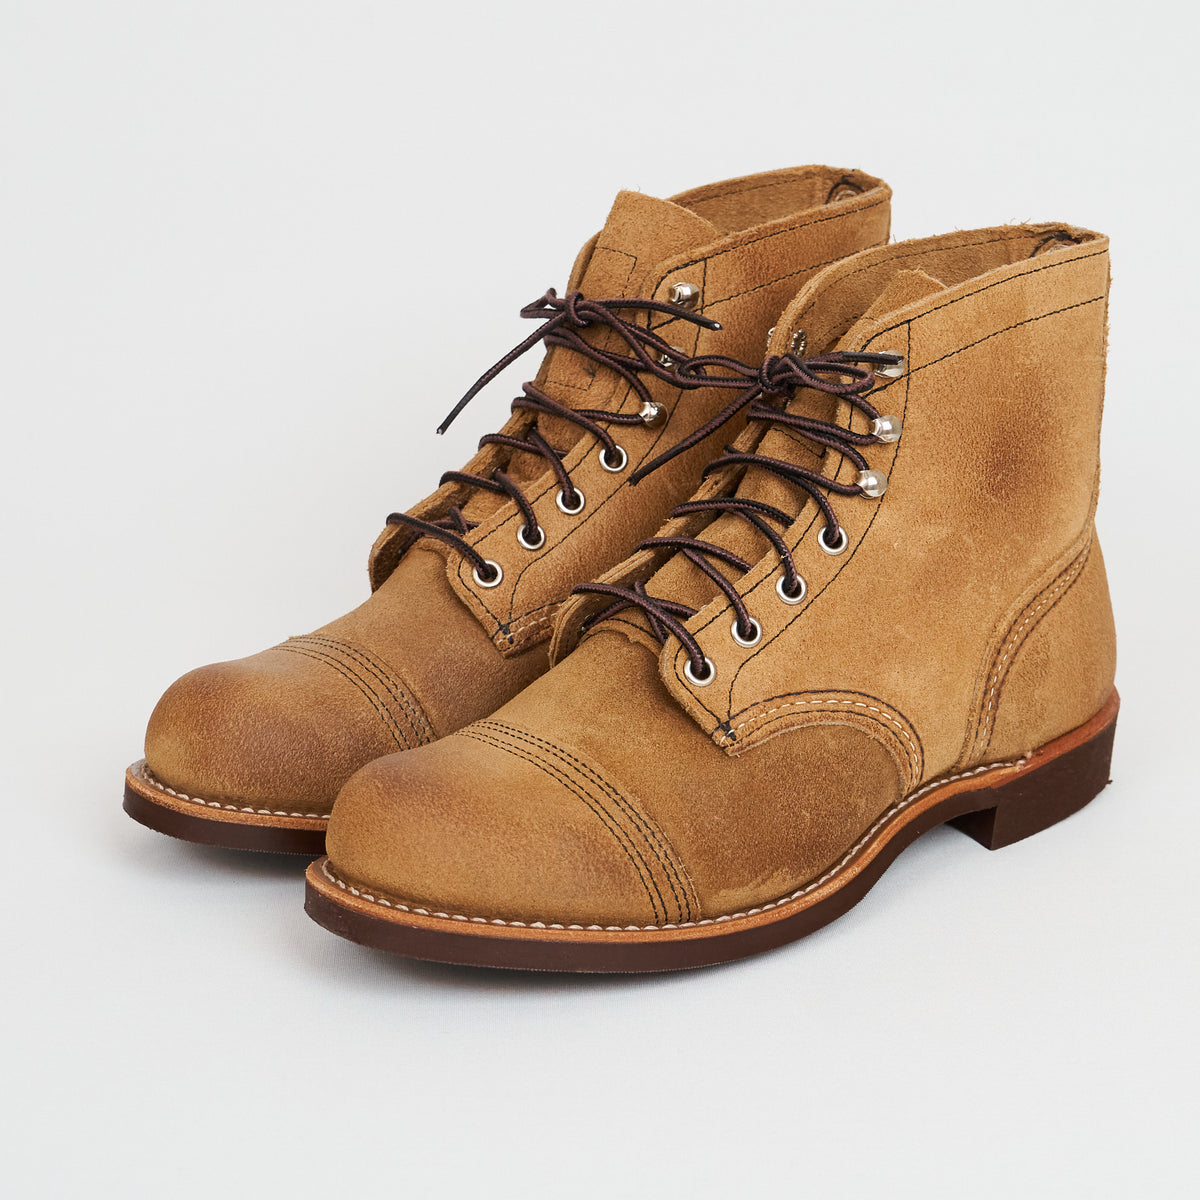 Red Wing Heritage Shoes Iron Ranger 8086, 8085, 8083, 8119, 8084